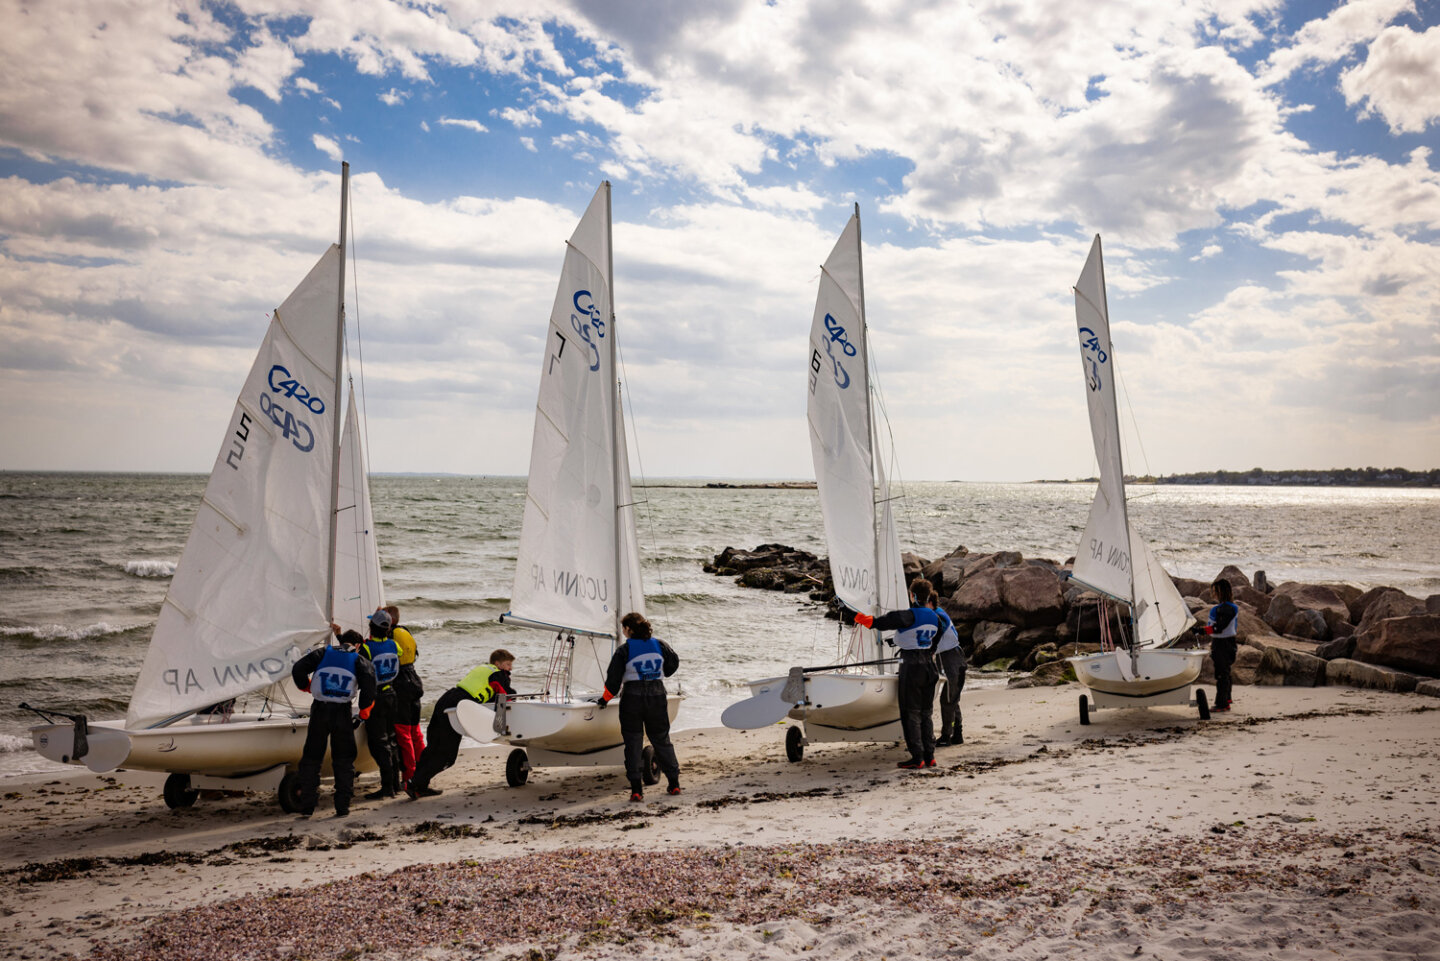 Williams school sailing students line up their sailboats on the beach to launch